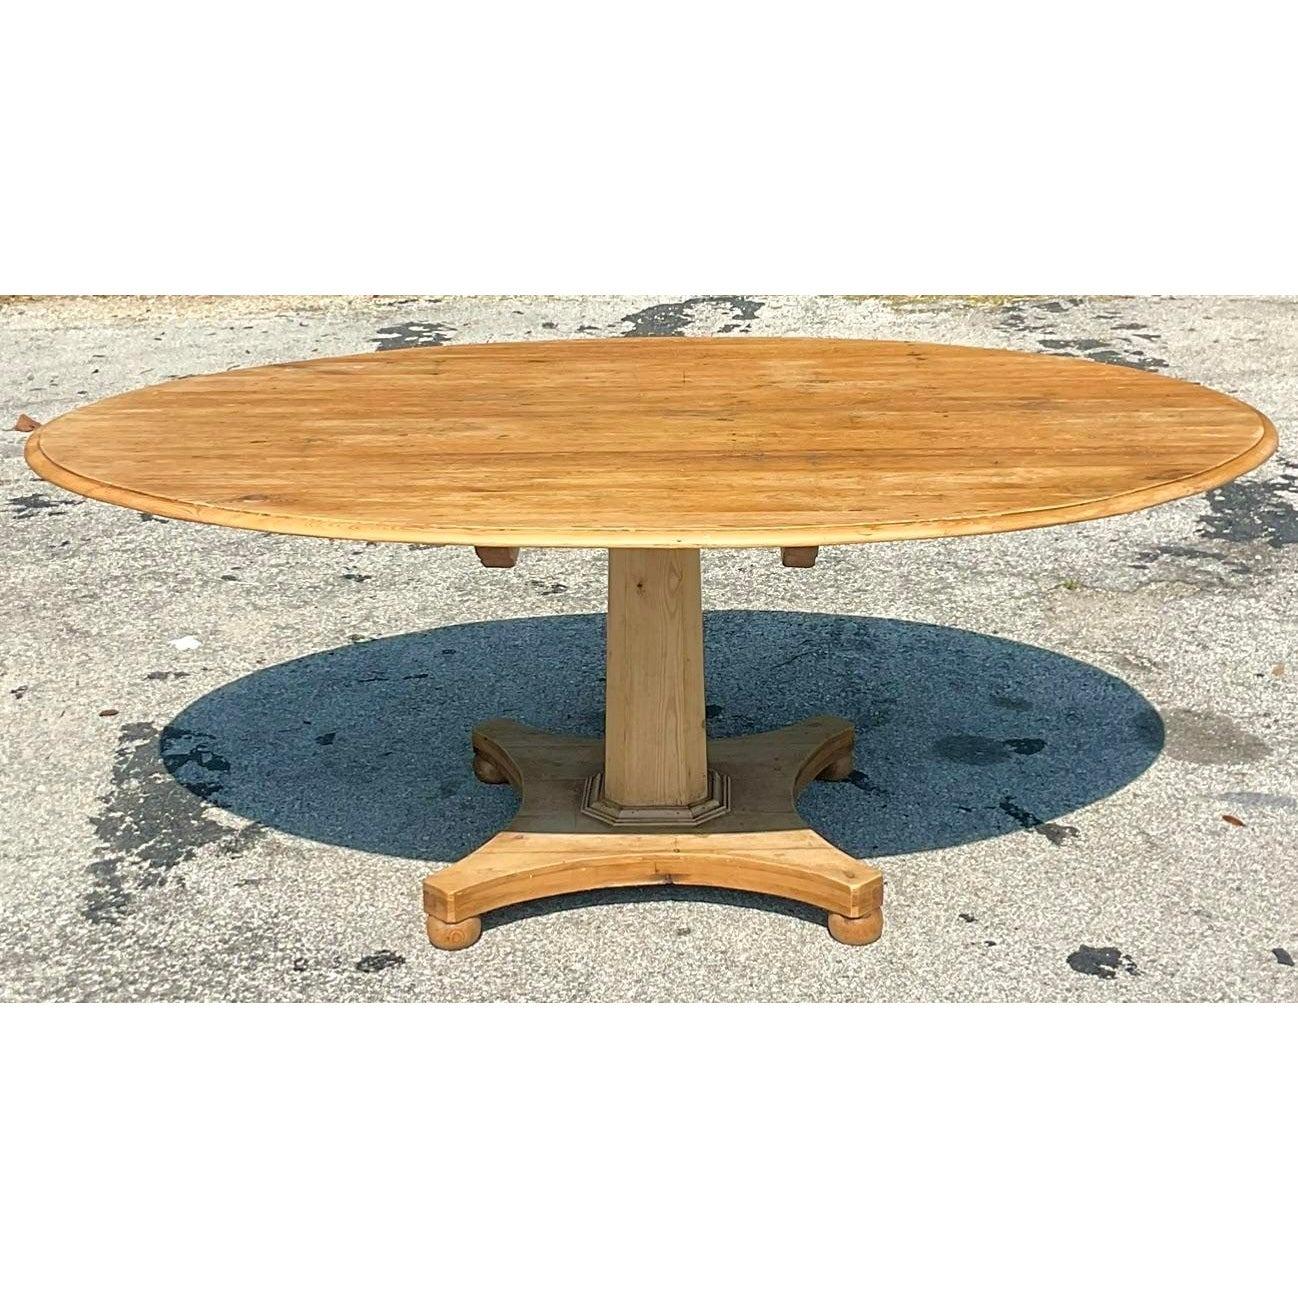 A fantastic vintage Boho pine dining table. A chic patinated finish for that rustic look. A rare elliptical shape with a center pedestal. Acquired from a Palm Beach estate.